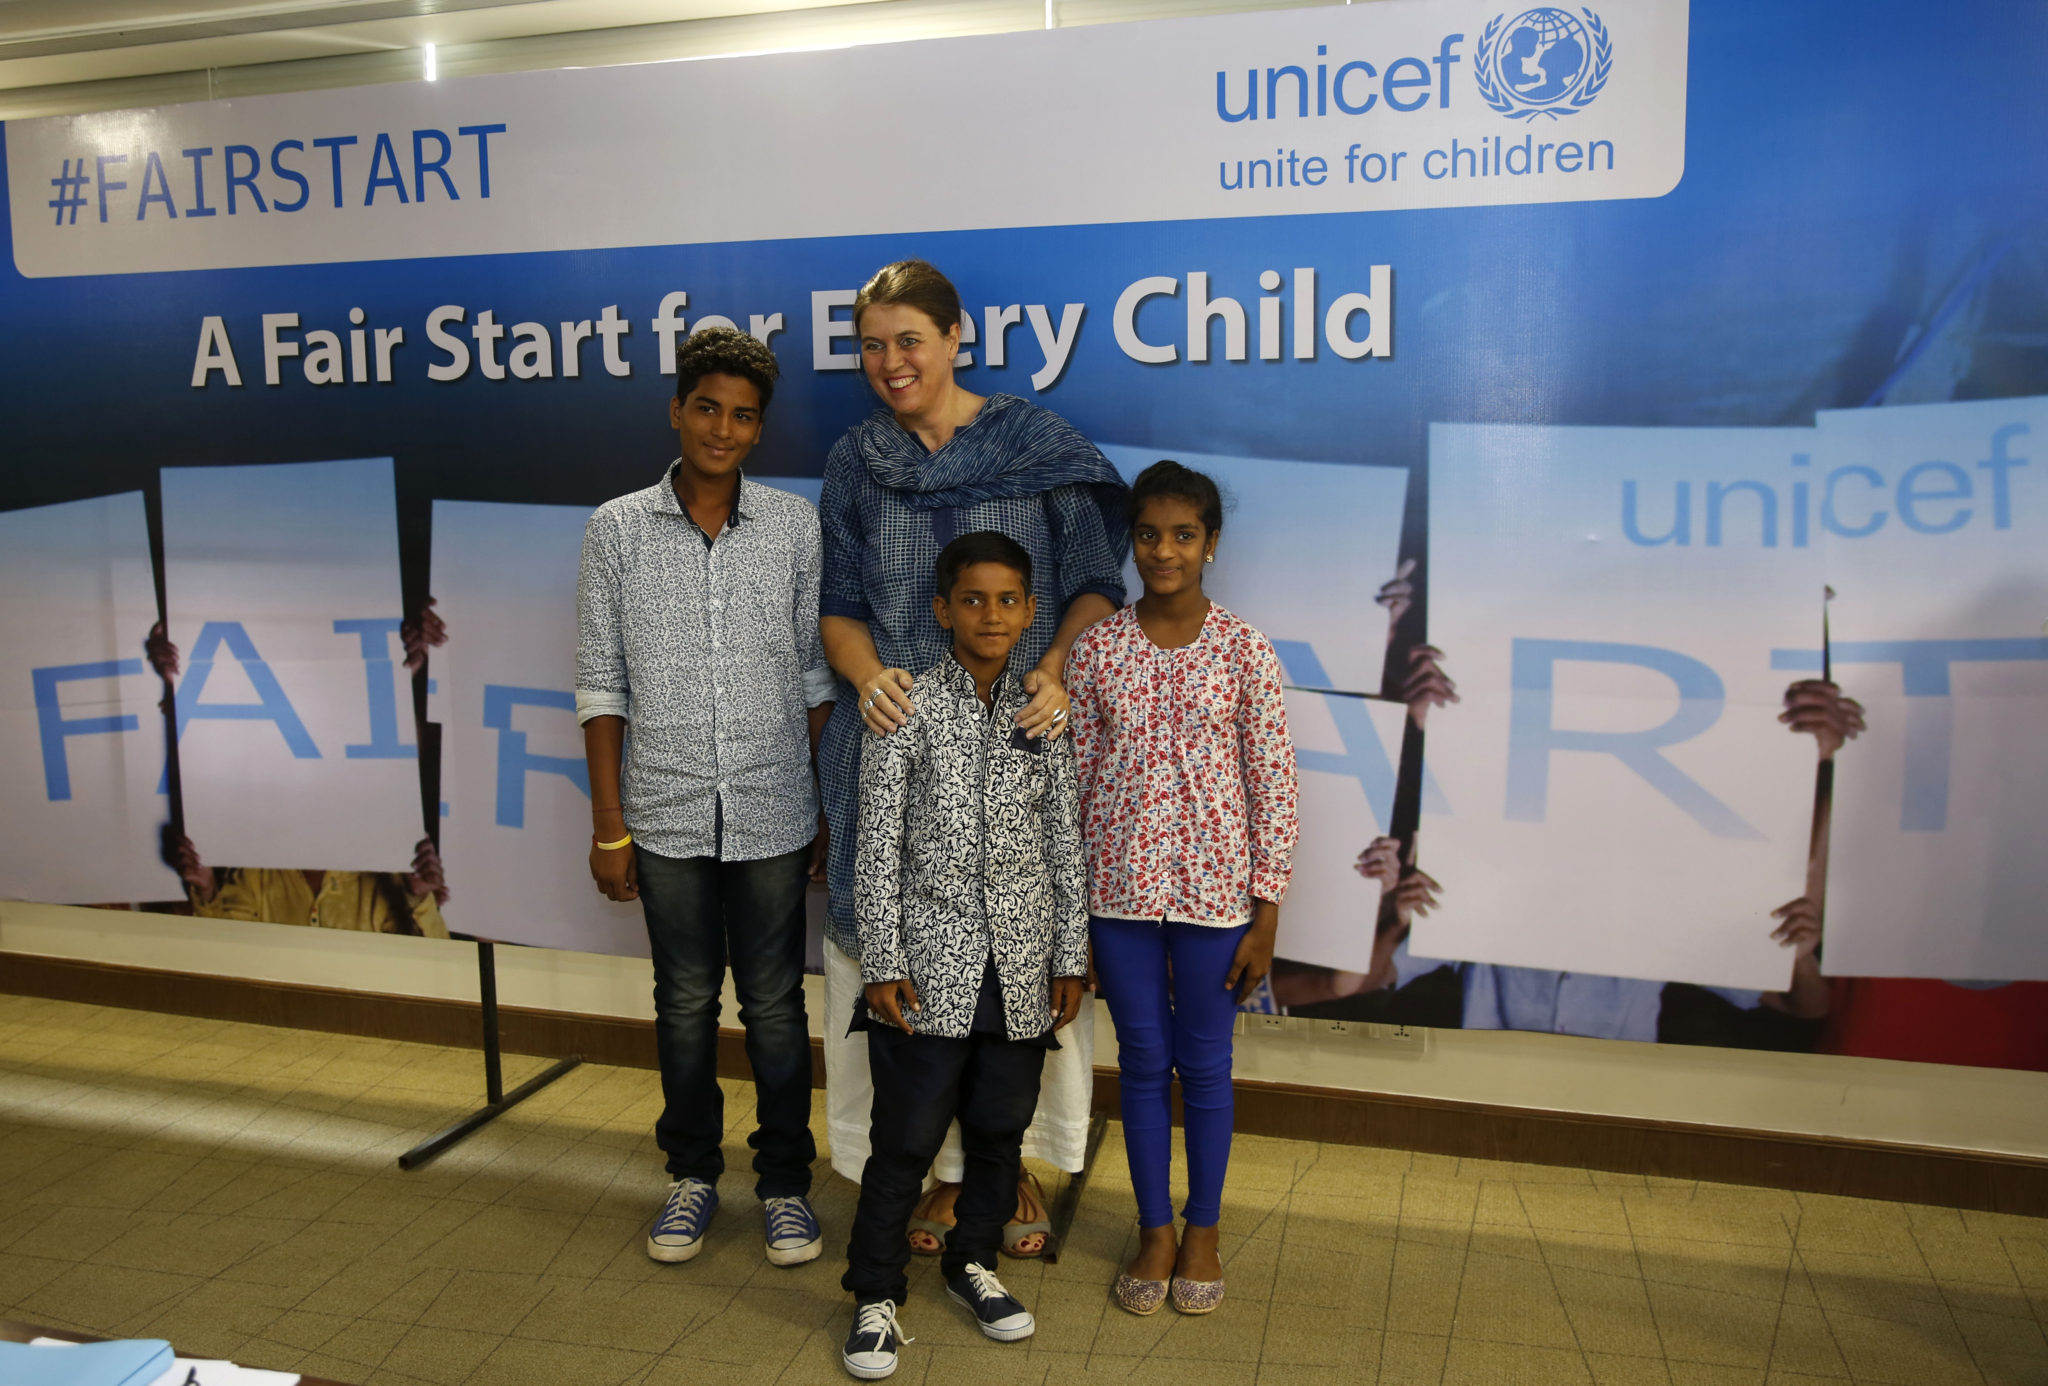 Chief Advocacy and Communication, Unicef India, Caraline Den Dulk, centre, poses with the crew of #FairStart campaign, Cameraman Sahil, left, Art Director Suraj, centre foreground, and Costume organiser Belinda after a press conference in New Delhi, India, Wednesday, May 25, 2016. Photographer/ Mustafa Quraishi